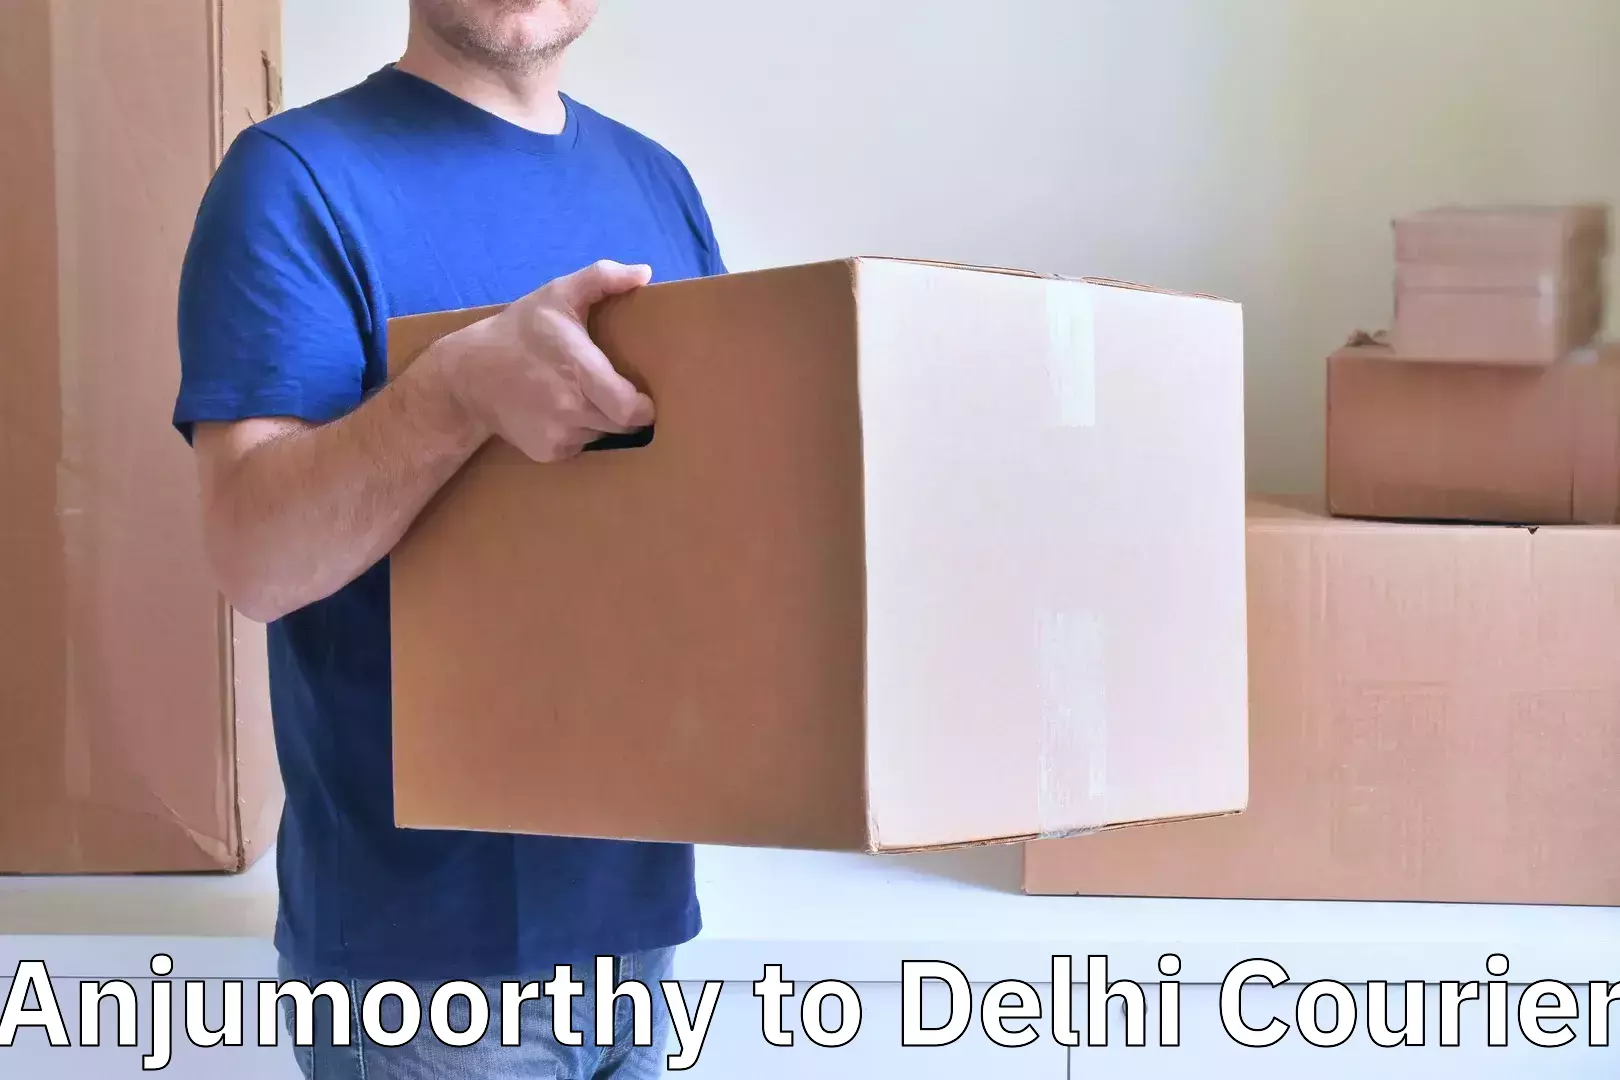 Personal effects shipping in Anjumoorthy to Jhilmil